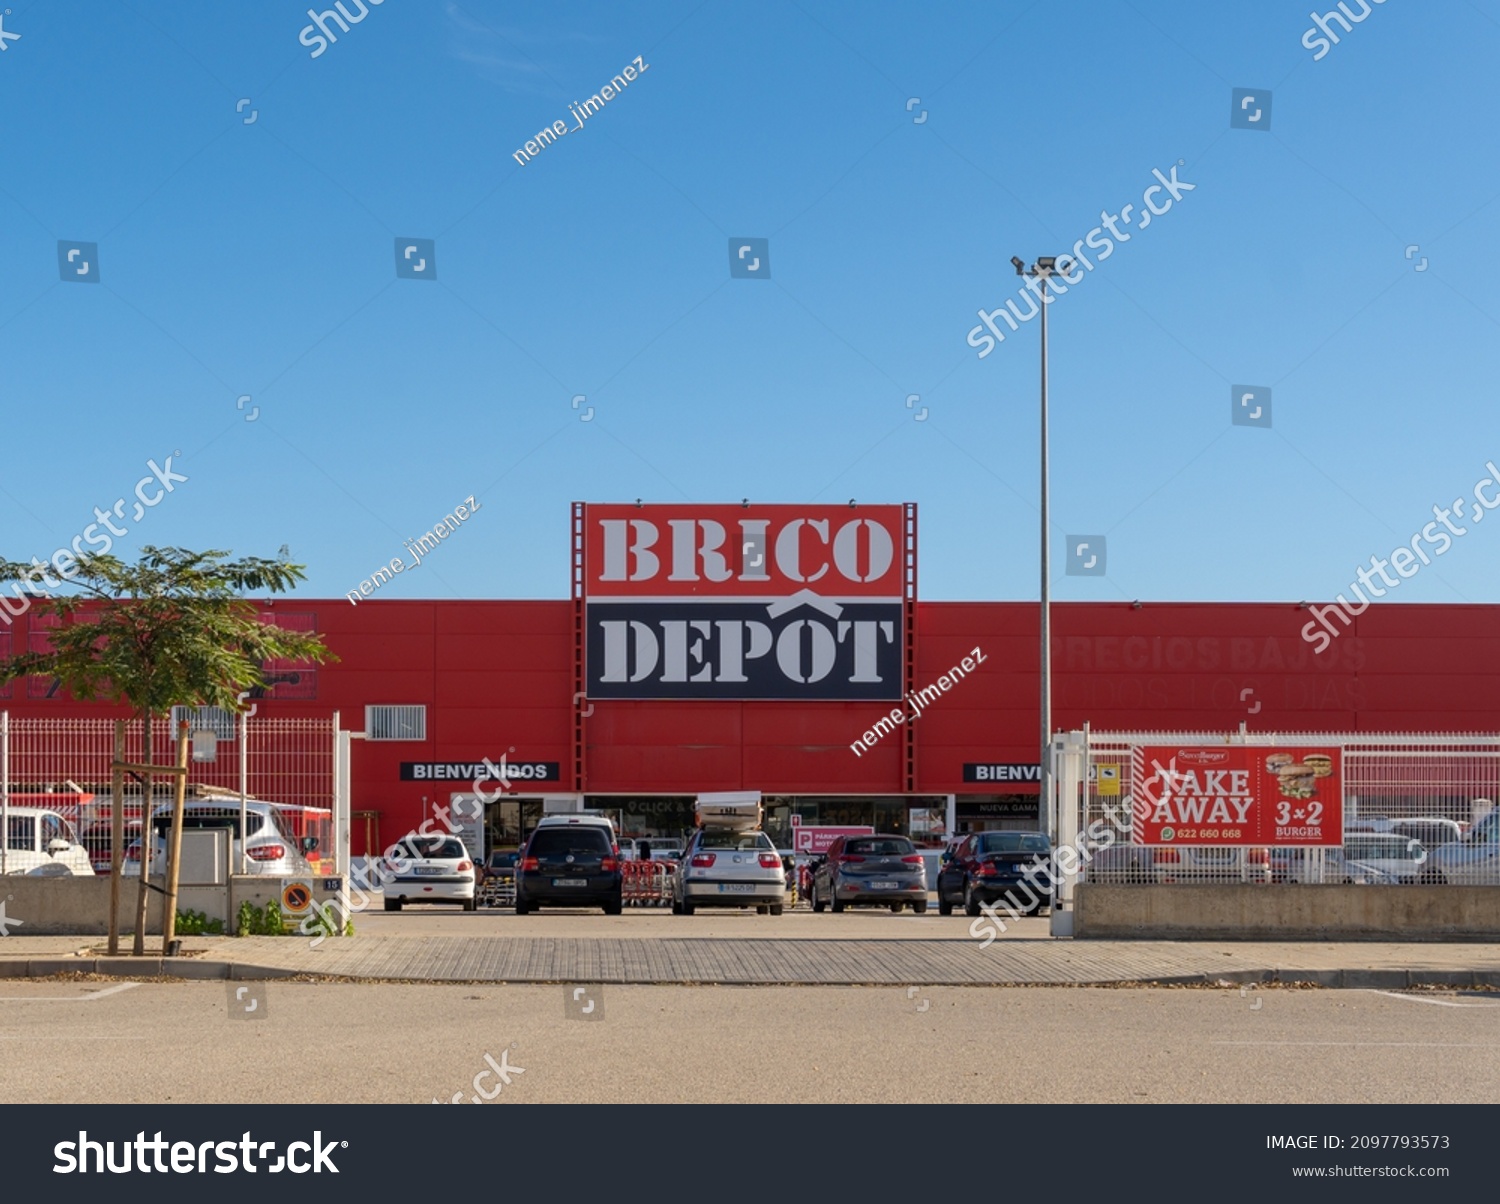 second hand Southeast Zoom in 38 Brico Depot Images, Stock Photos & Vectors | Shutterstock